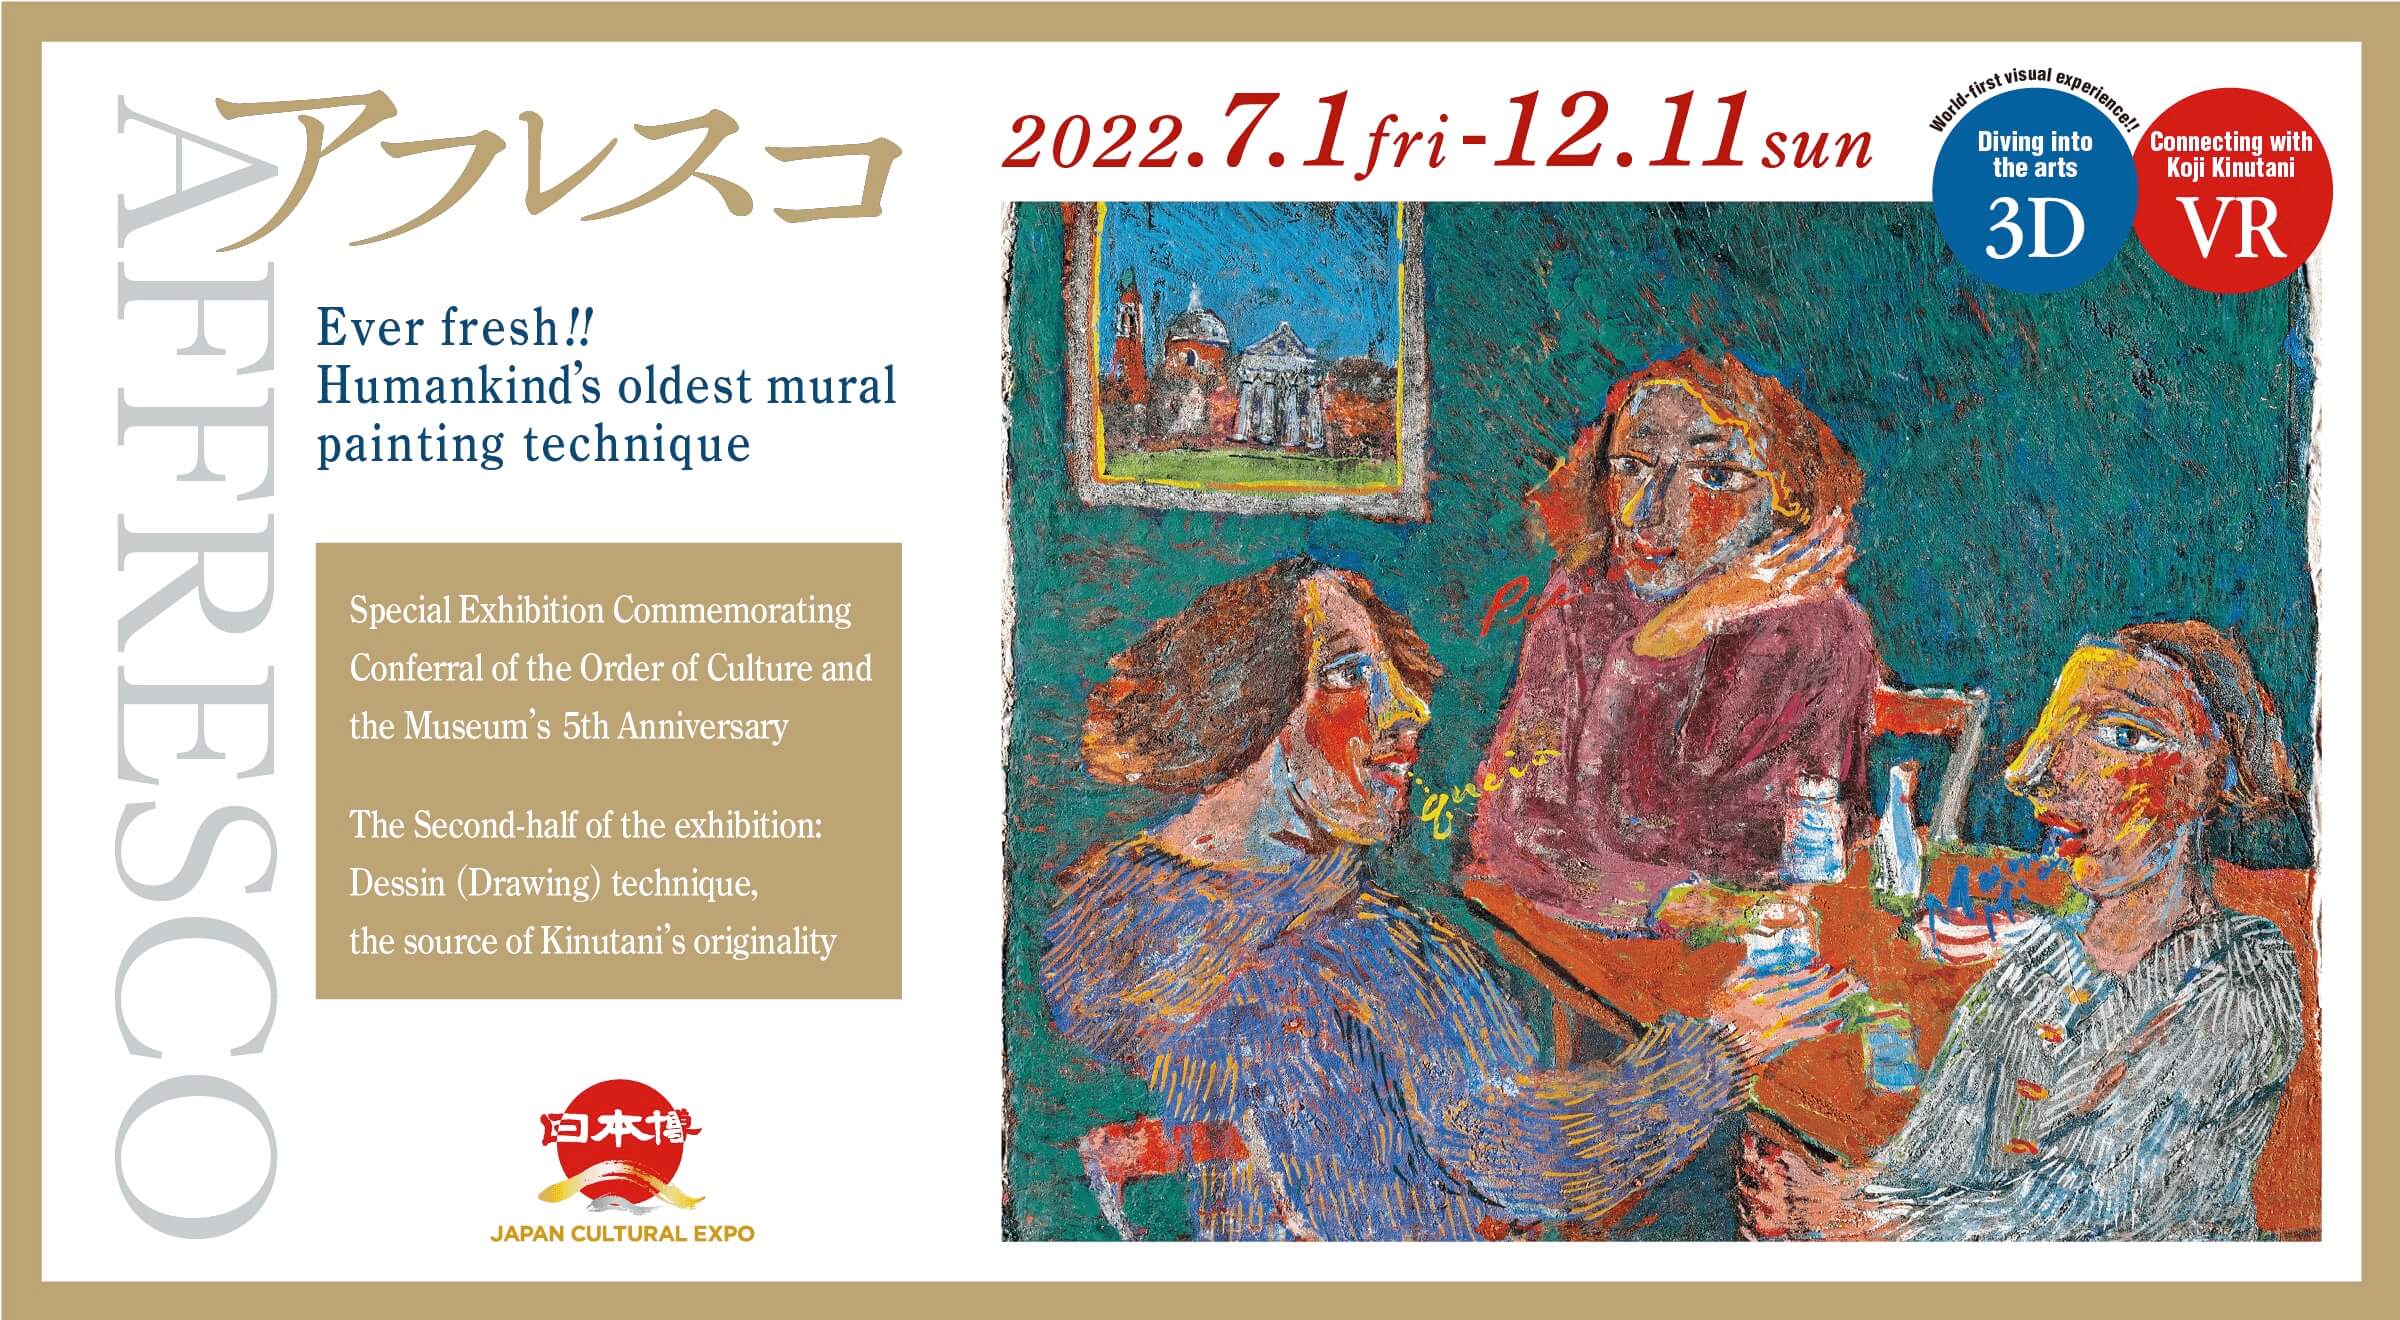 Special Exhibition, “AFFRESCO” Part 2,Launch of special corner featuring drawings, the source of the artist's creativity